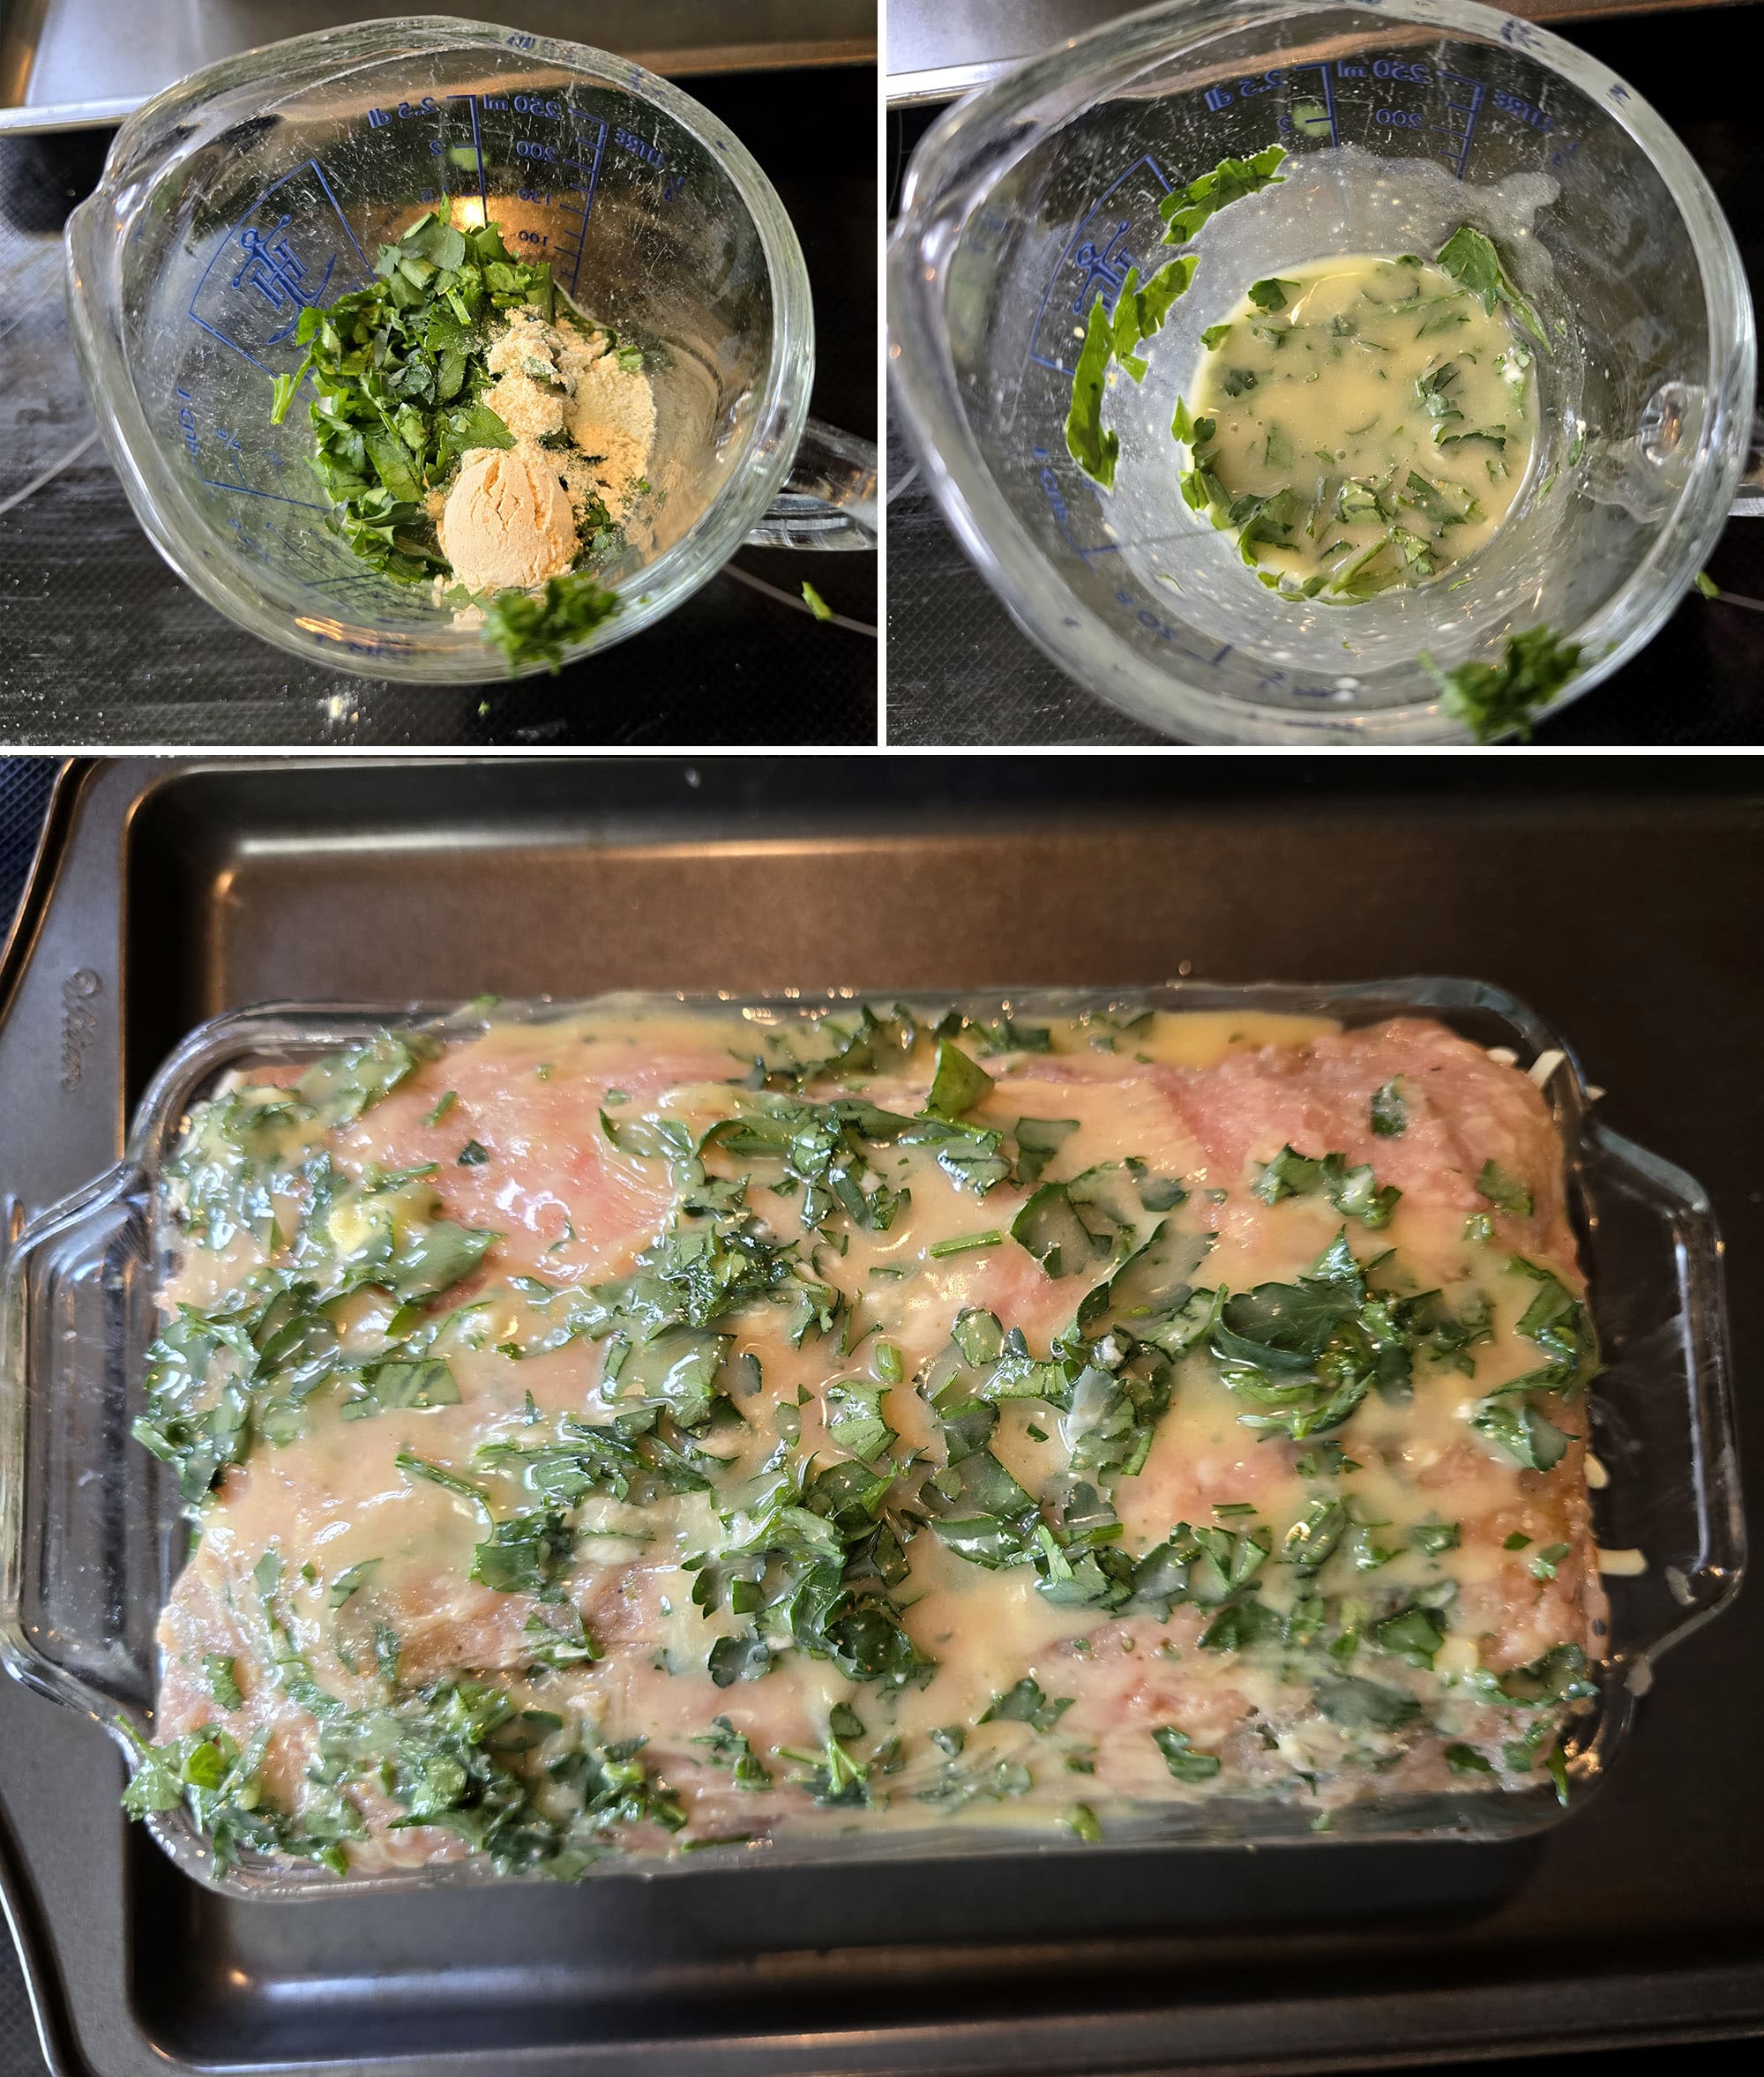 The garlic and parsley butter mixture being mixed and poured over the muffuletta meatloaf.